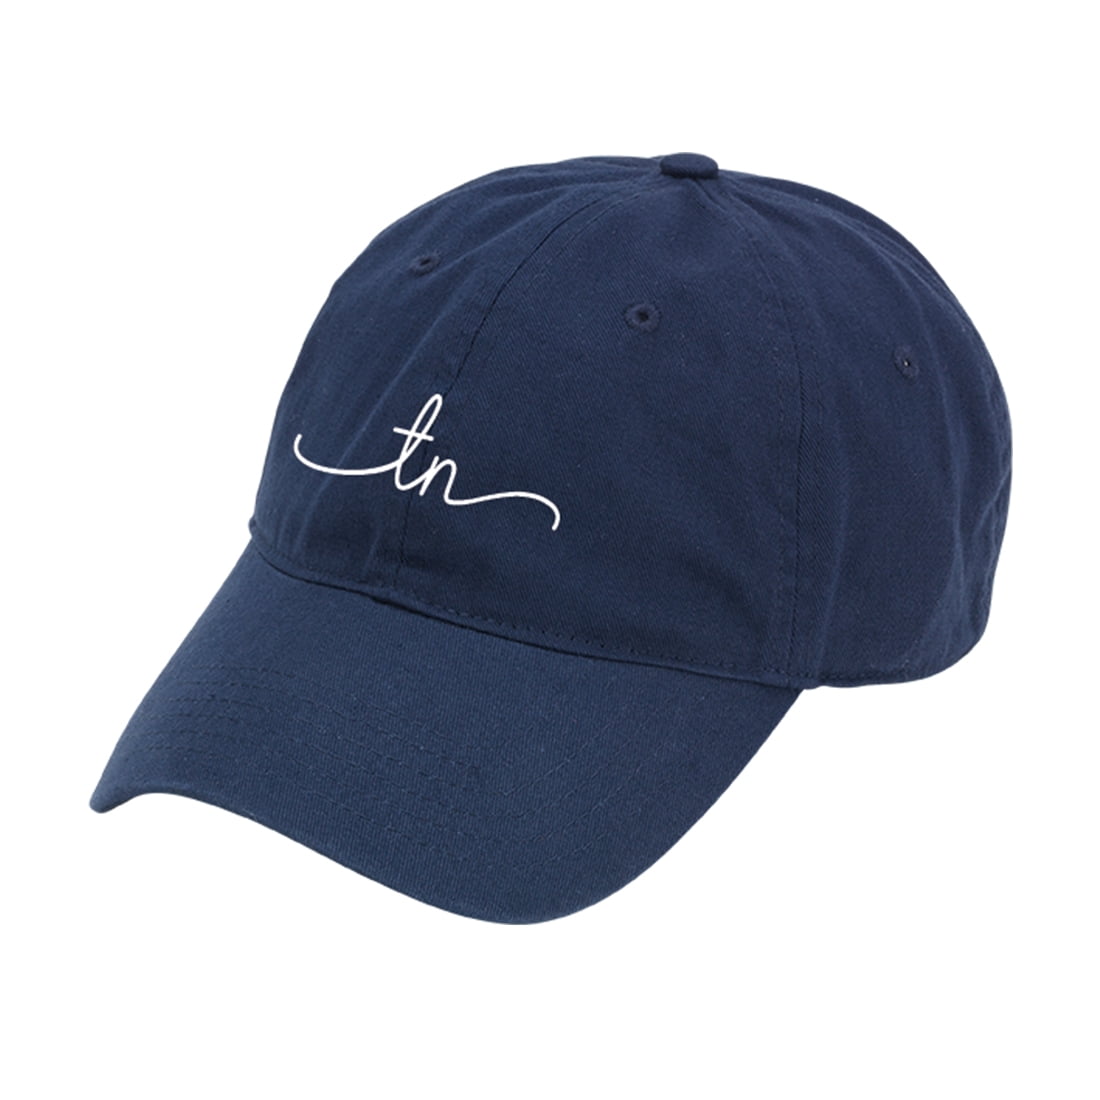 Tennessee Rep Your State Navy Cap